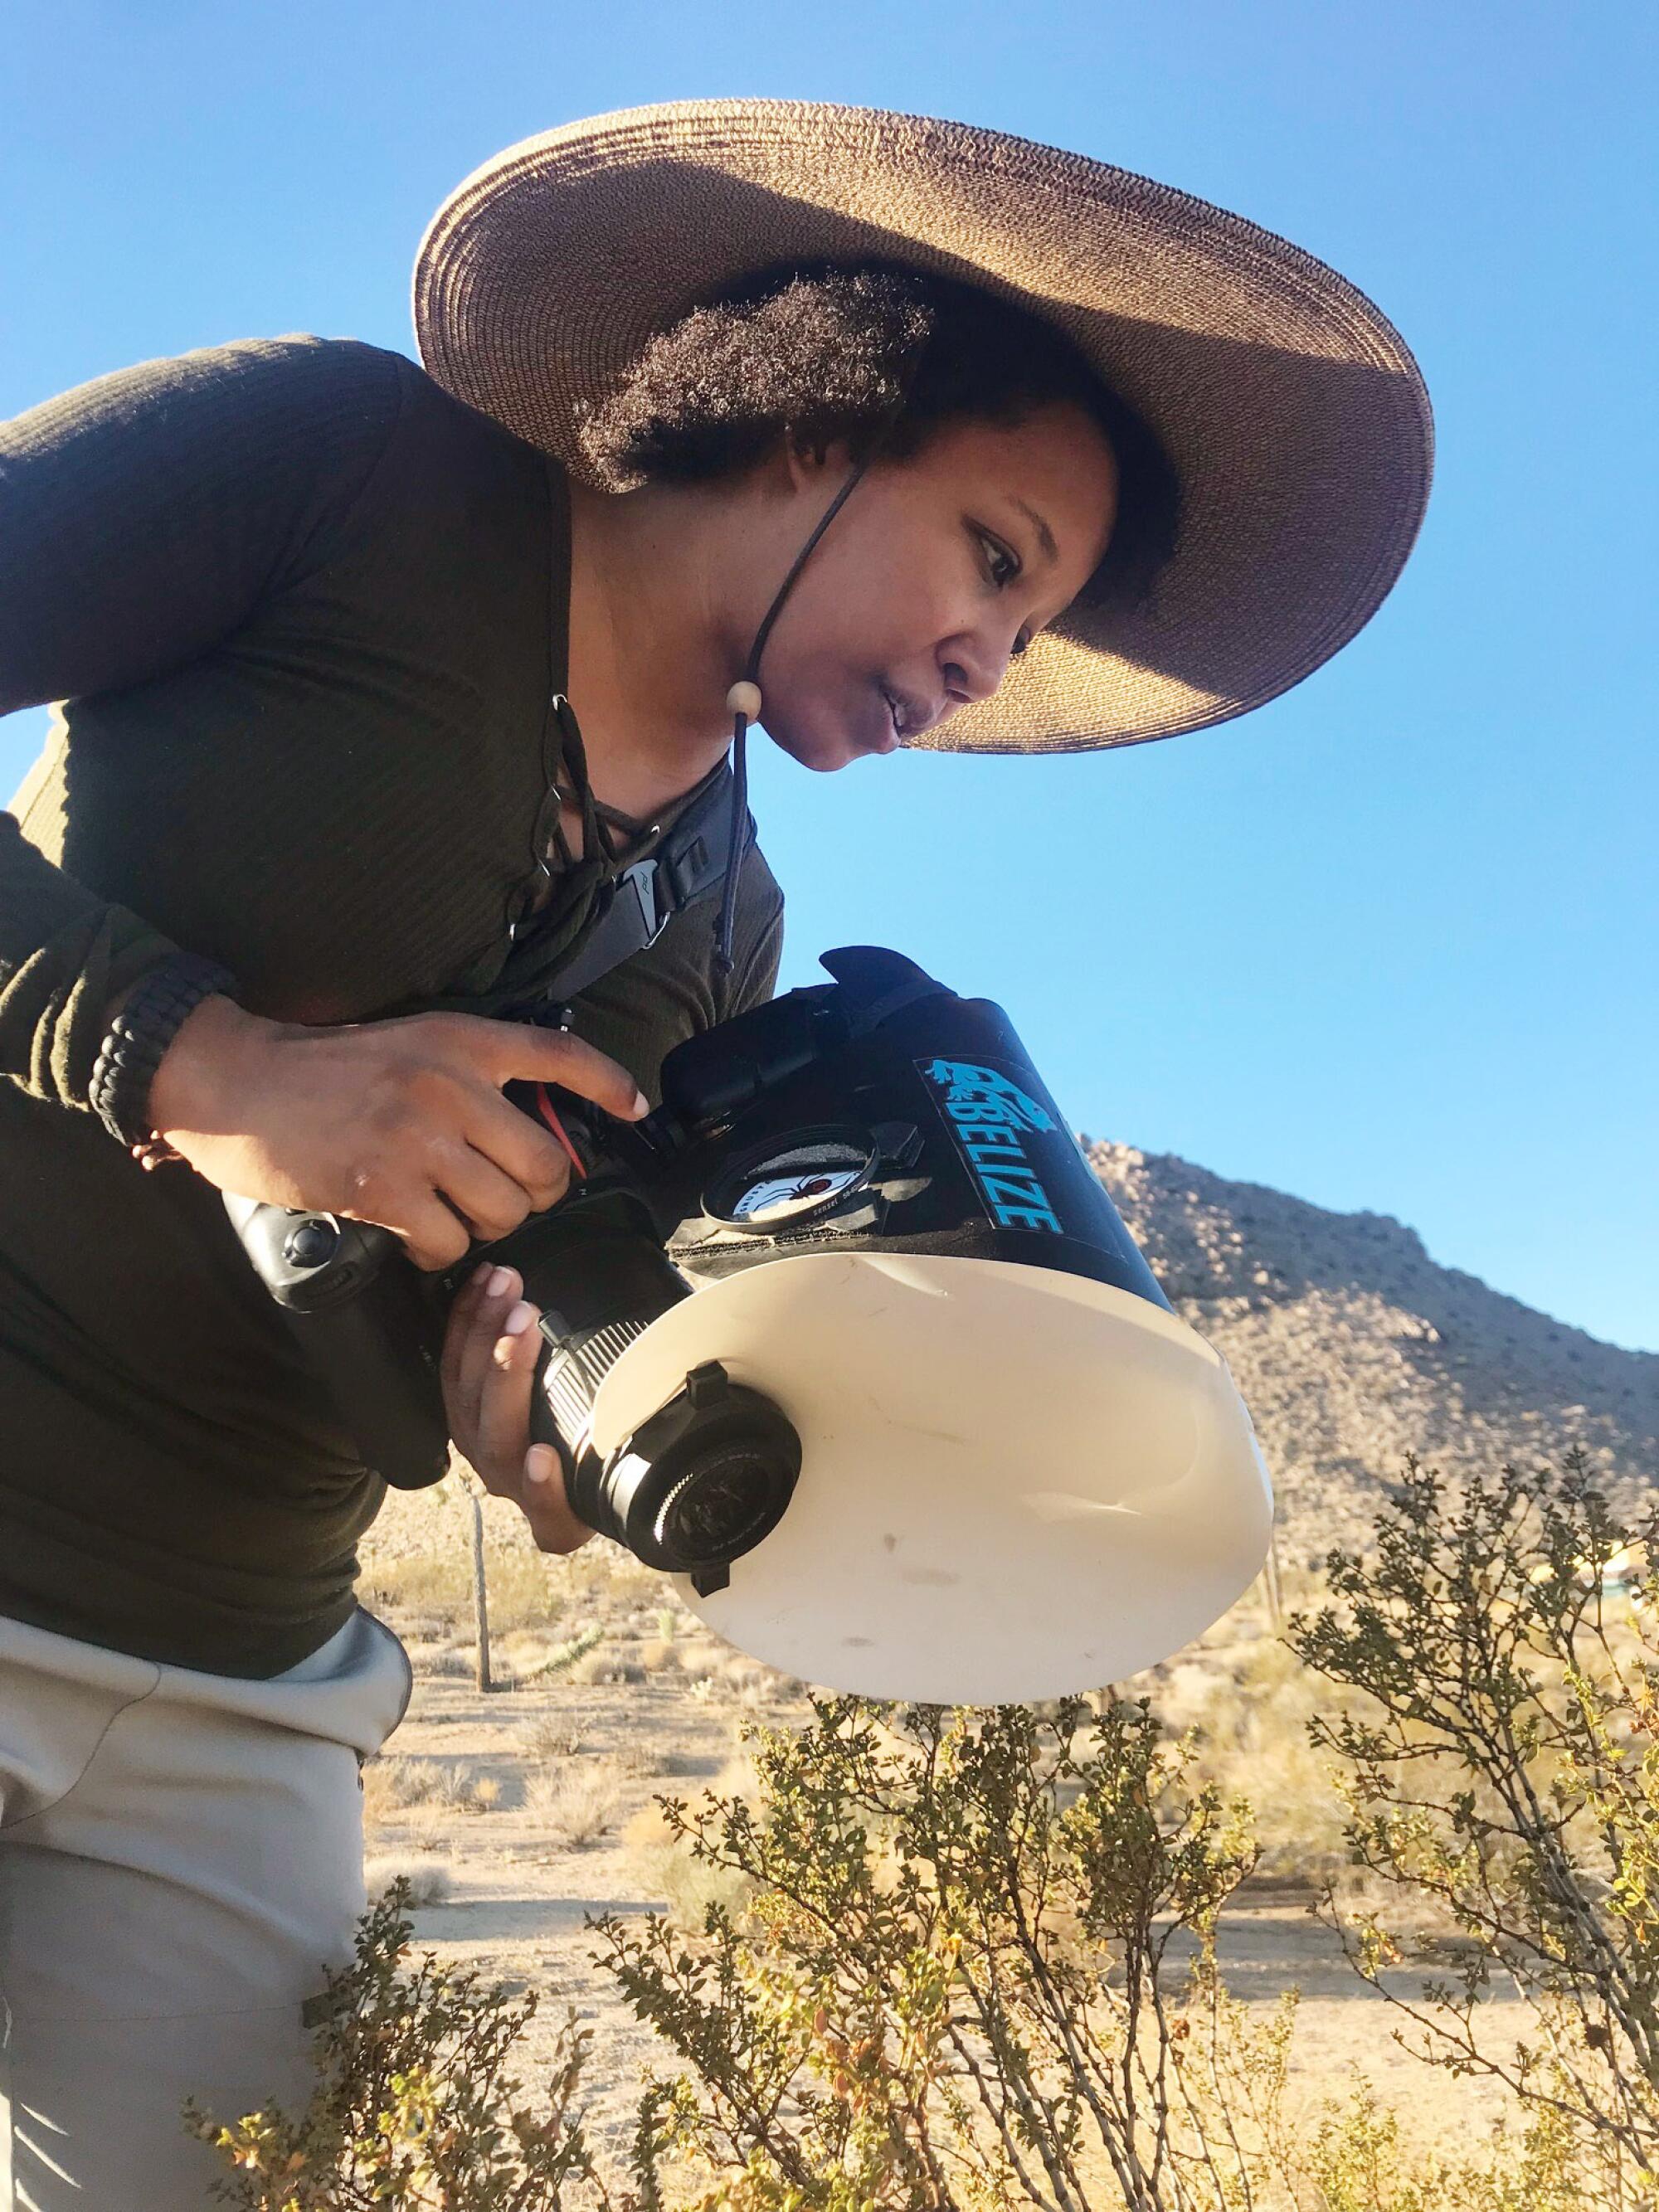 Krystle Hickman, wearing a broad-brimmed hat to protect her skin, searches for native bees.